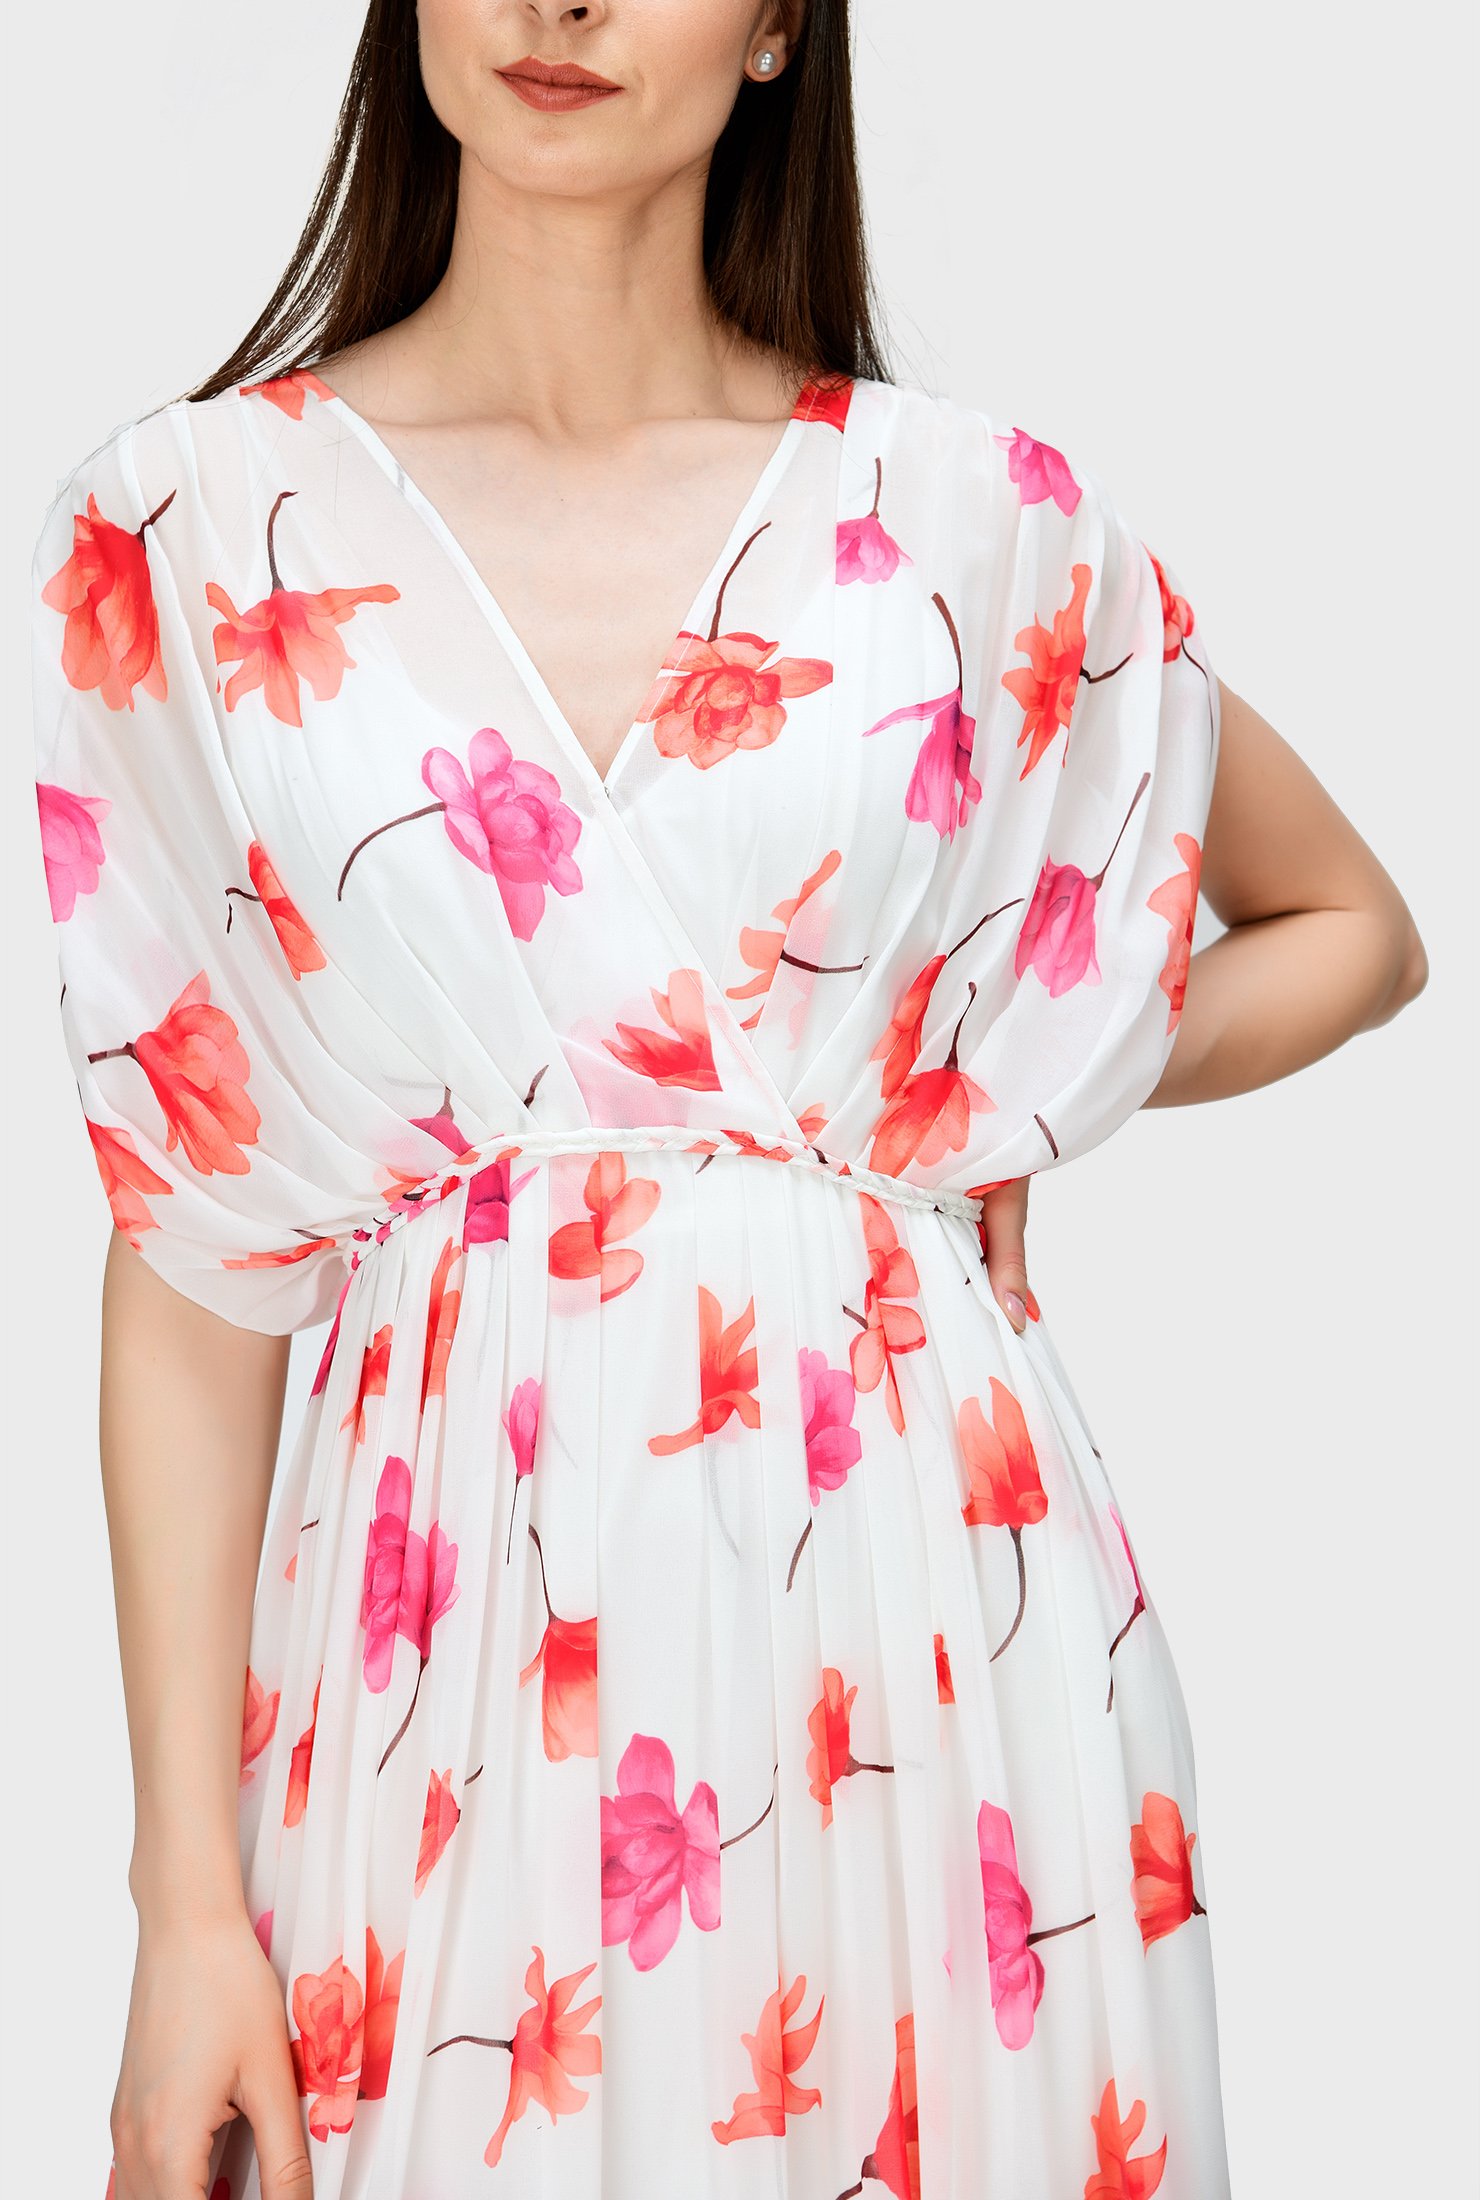 Our chic, blouson dress in floral print georgette is shaped by shirred shoulders and empire waist and cinched in with self-fabric braided trim. 